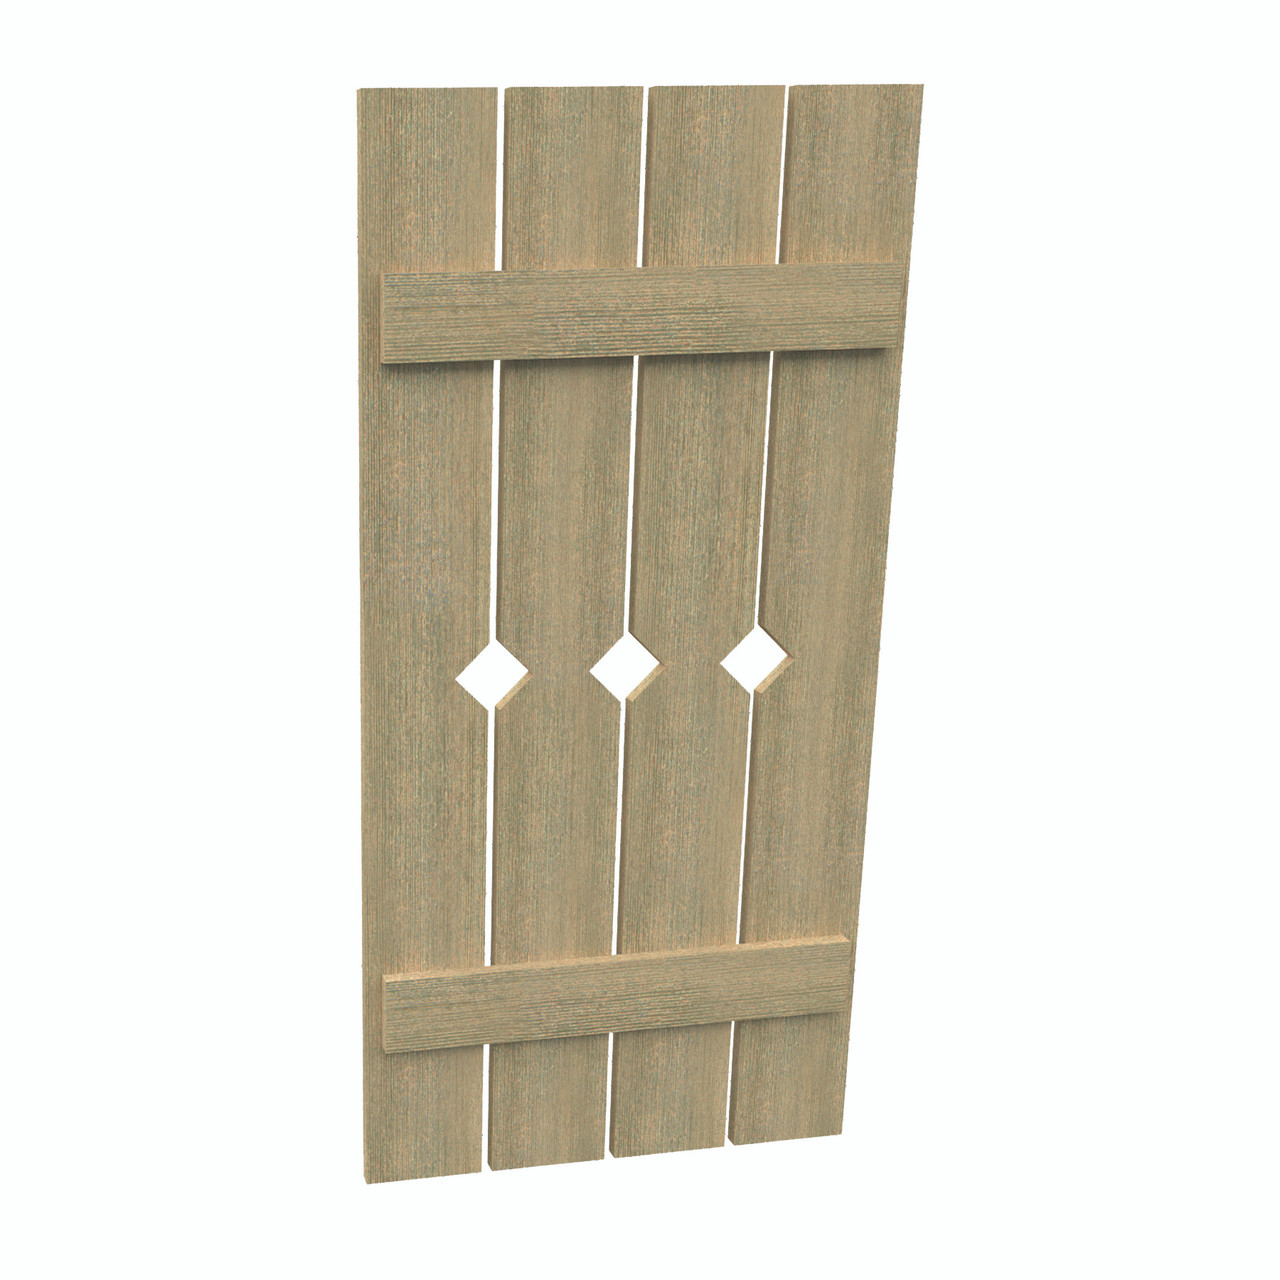 24 inch by 53 inch Plank Shutter with 4-Plank, Diamond